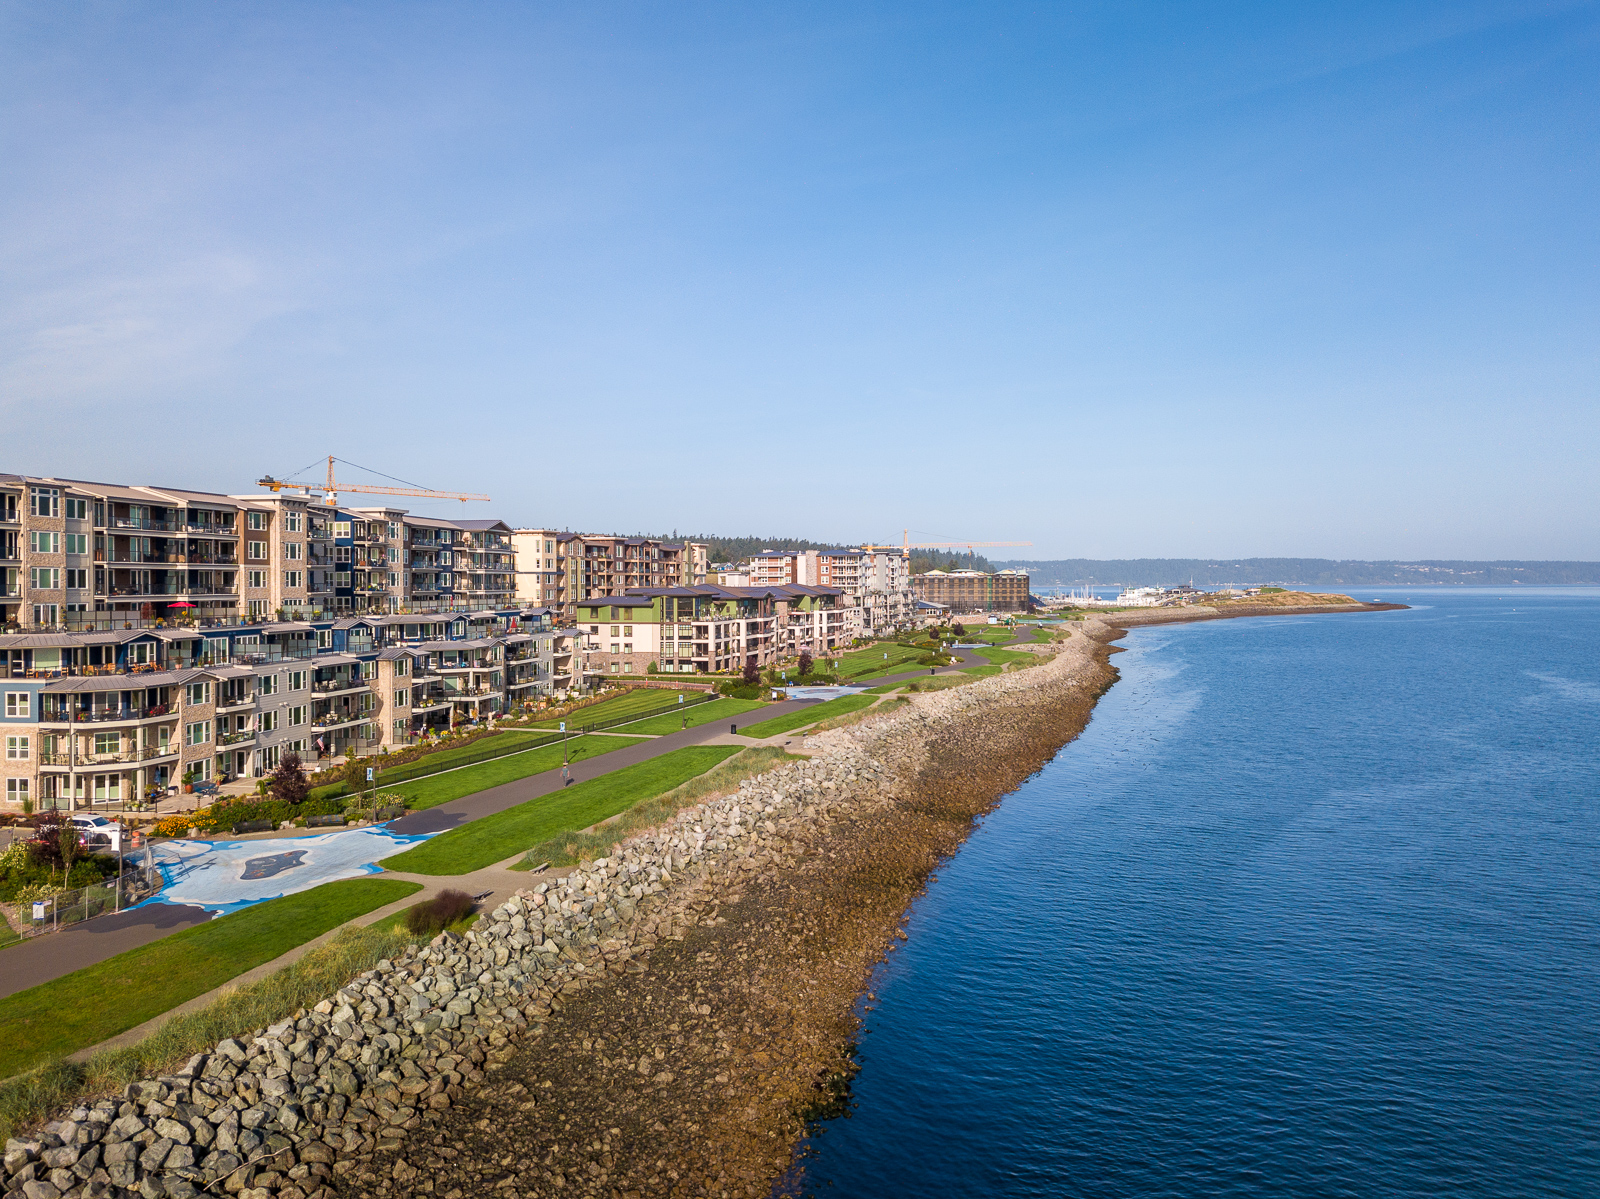 Elegant Condo and Easy Living at Point Ruston! Jaron Witsoe